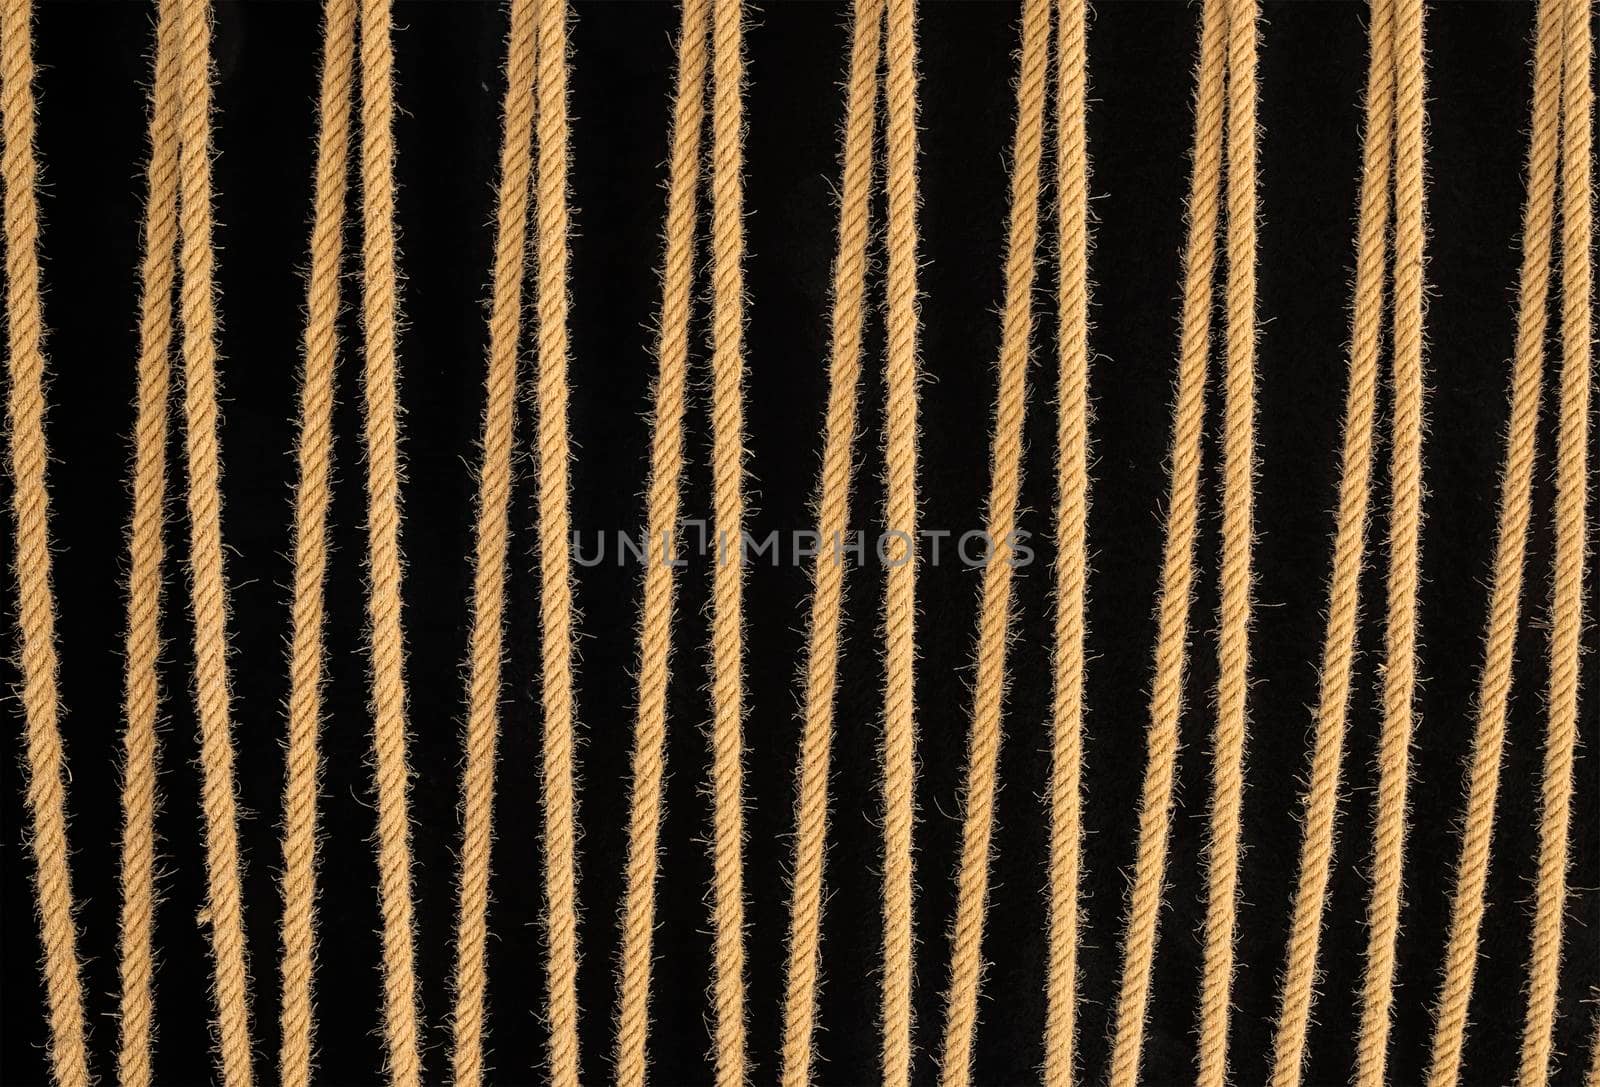 View of a net of rope. Abstract background